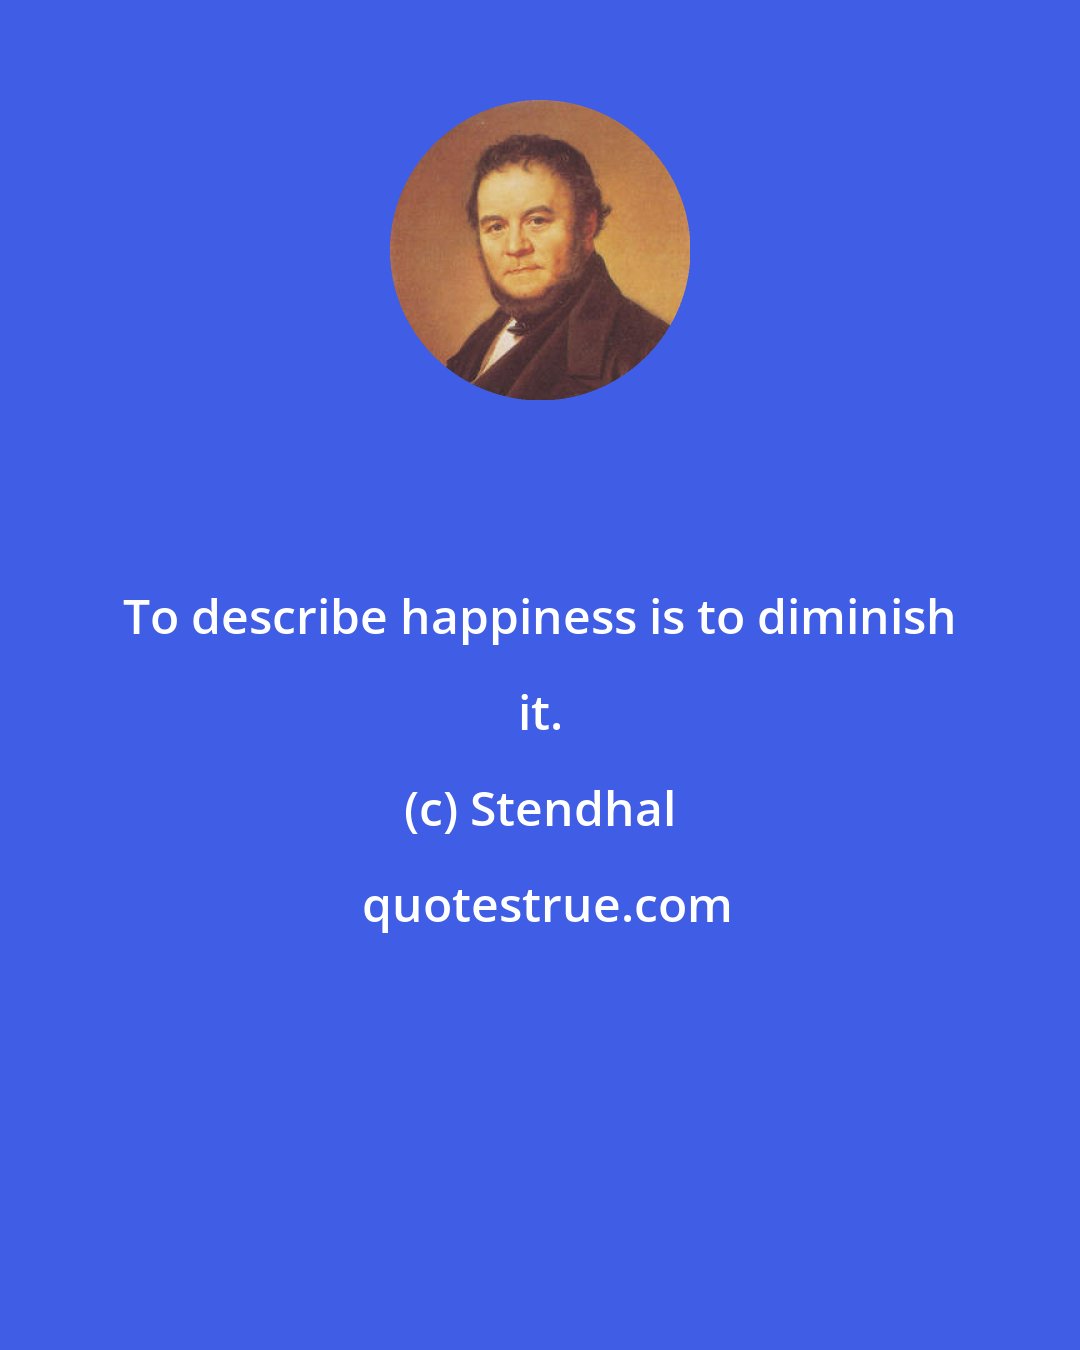 Stendhal: To describe happiness is to diminish it.